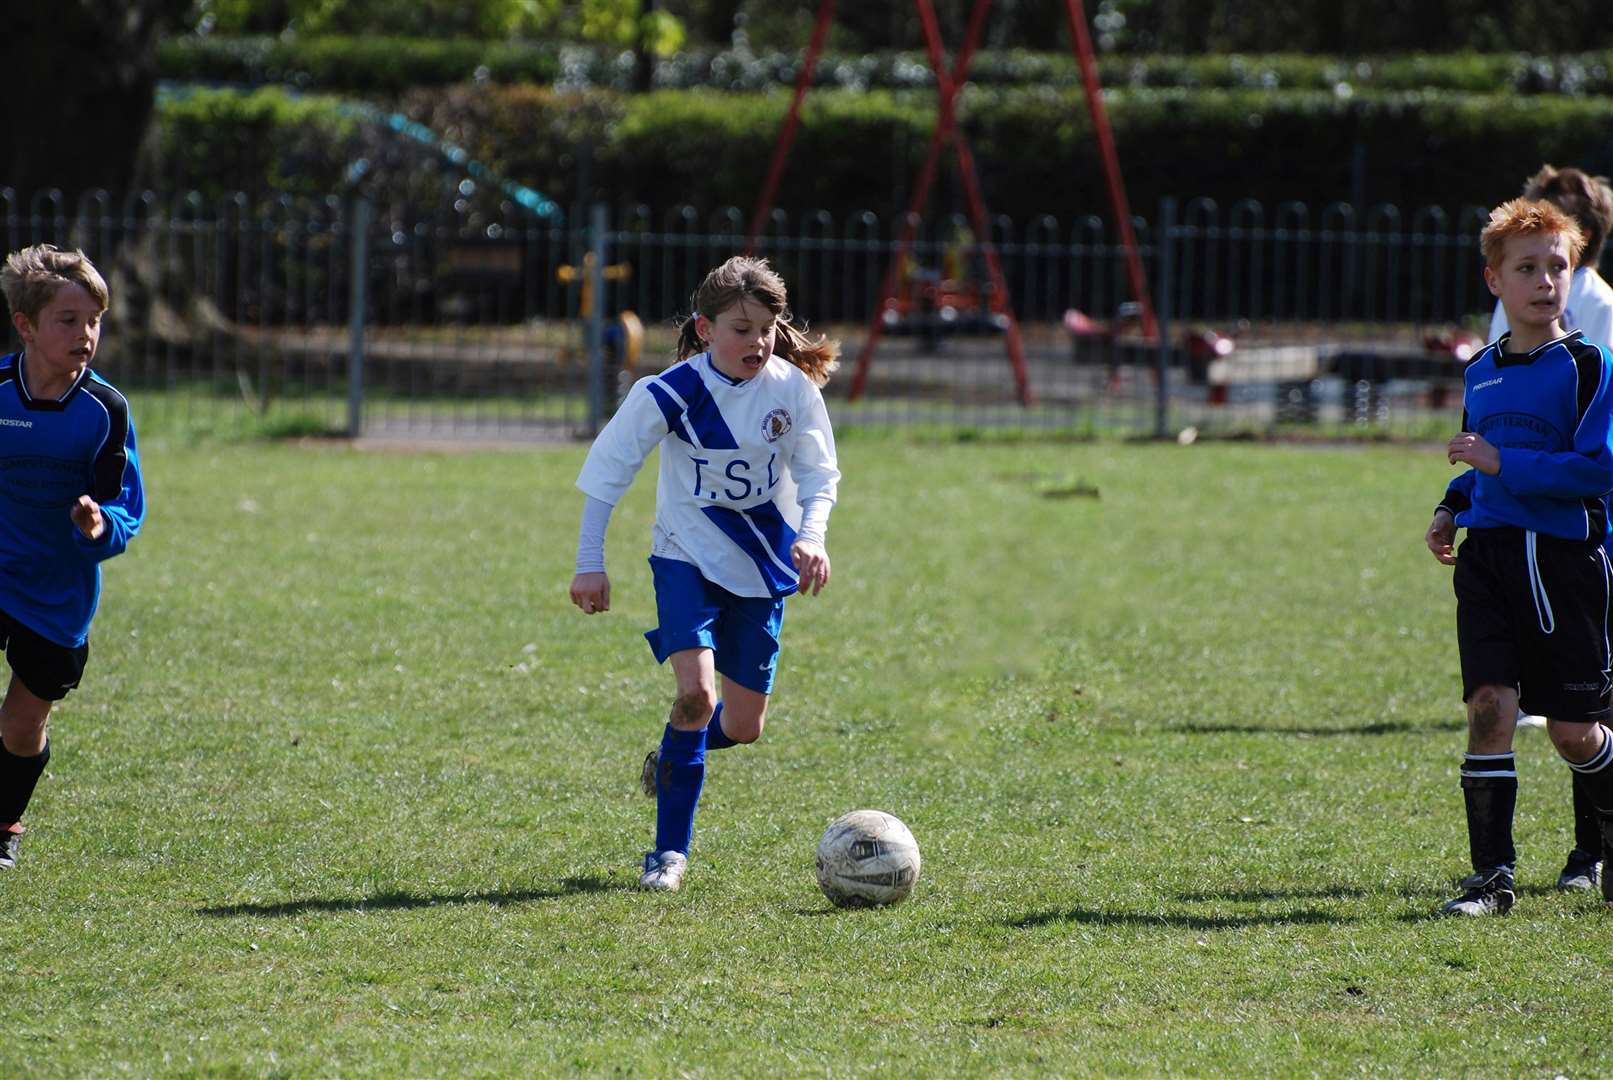 A young Alessia Russo playing for Bearsted boys